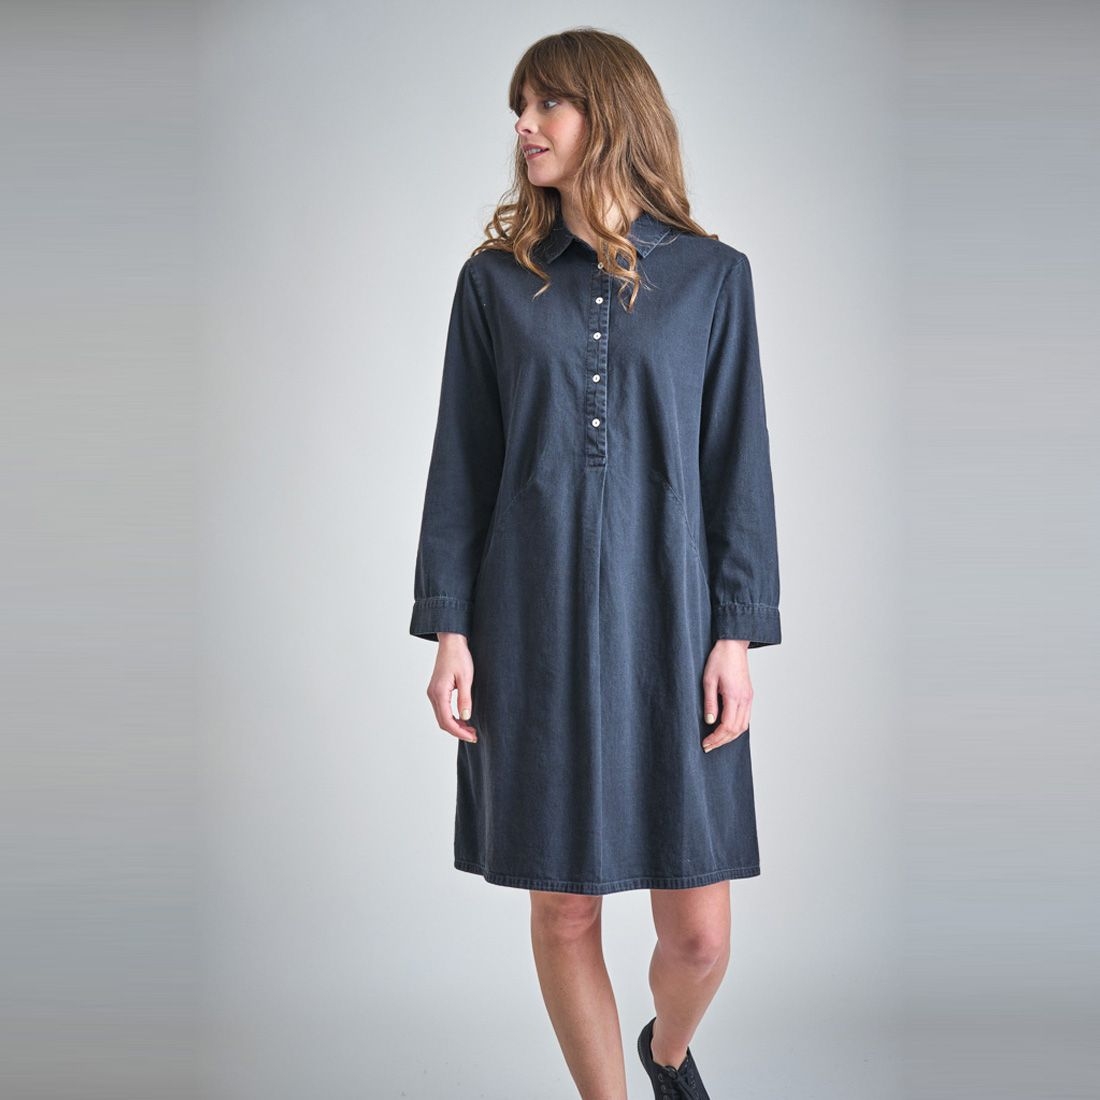 BIBICO Alexa Day Dress Black Denim : 12 - PLAISIRS - Wellbeing and  Lifestyle Products & Gifts